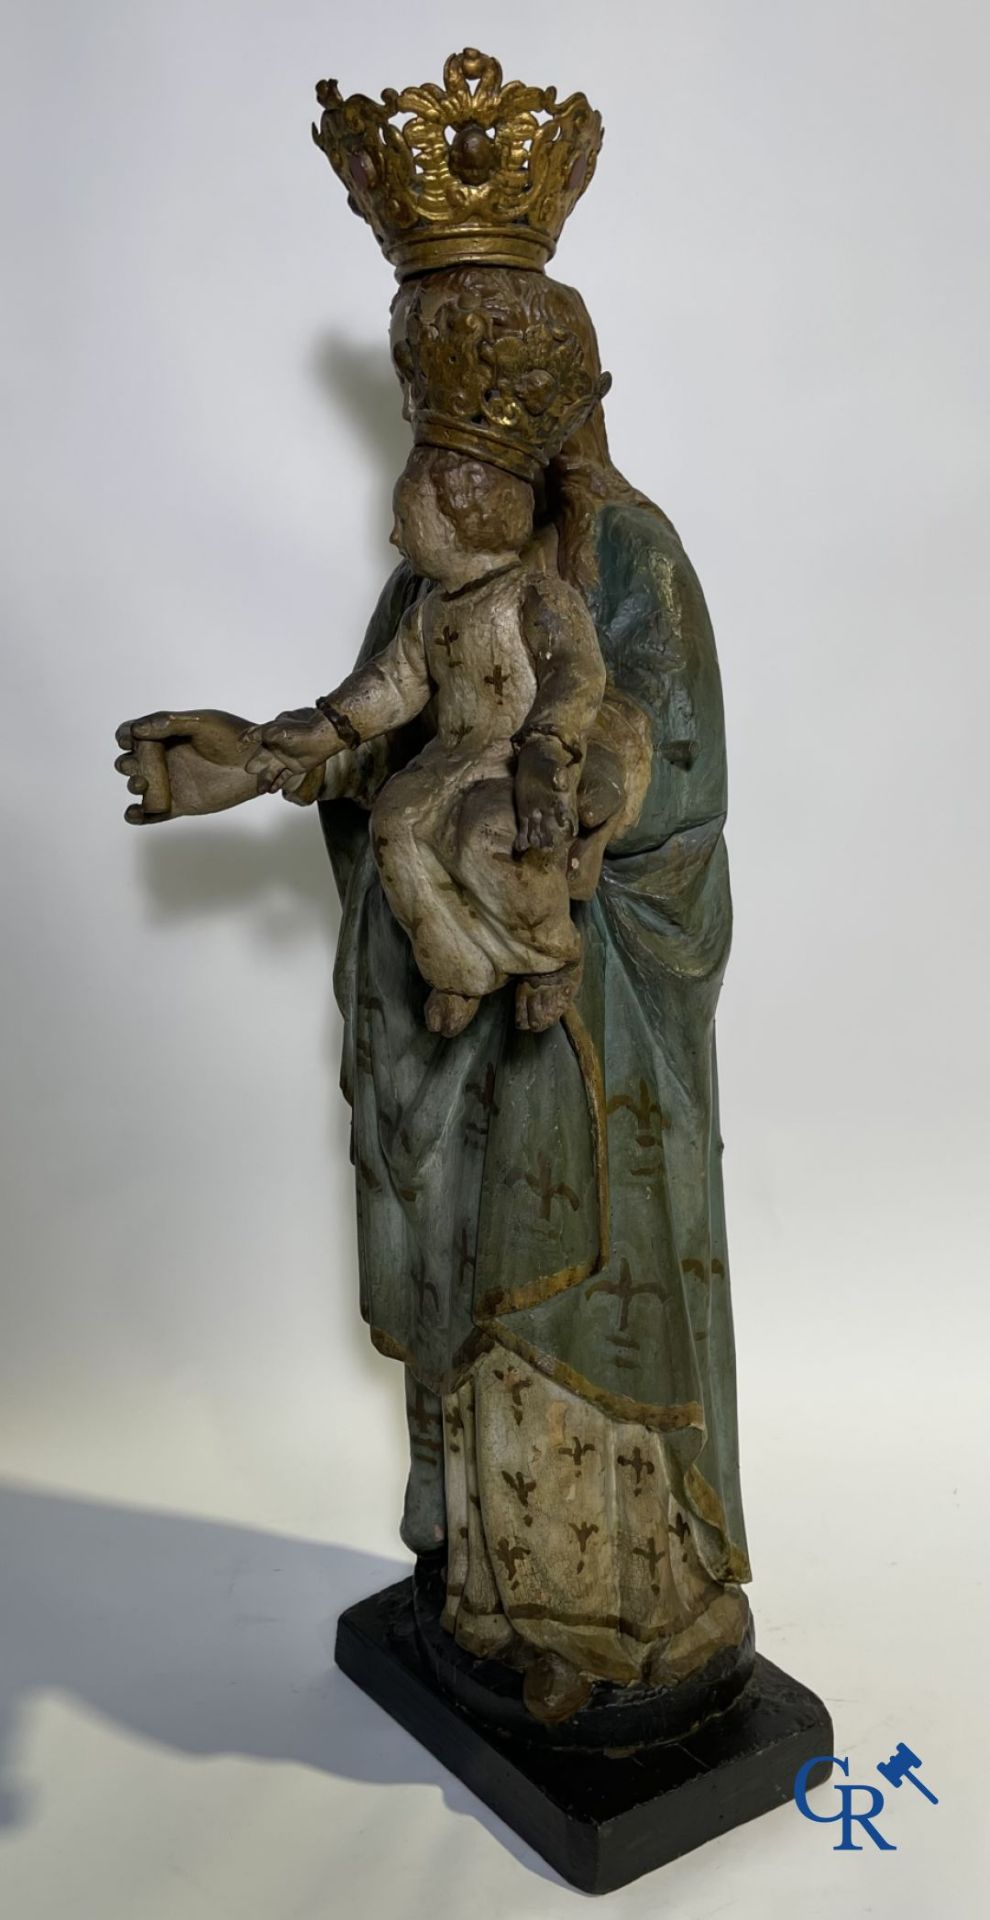 Wooden polychrome Baroque sculpture of Mary with child. The Crown inlaid with an amber-like rock. - Image 11 of 30